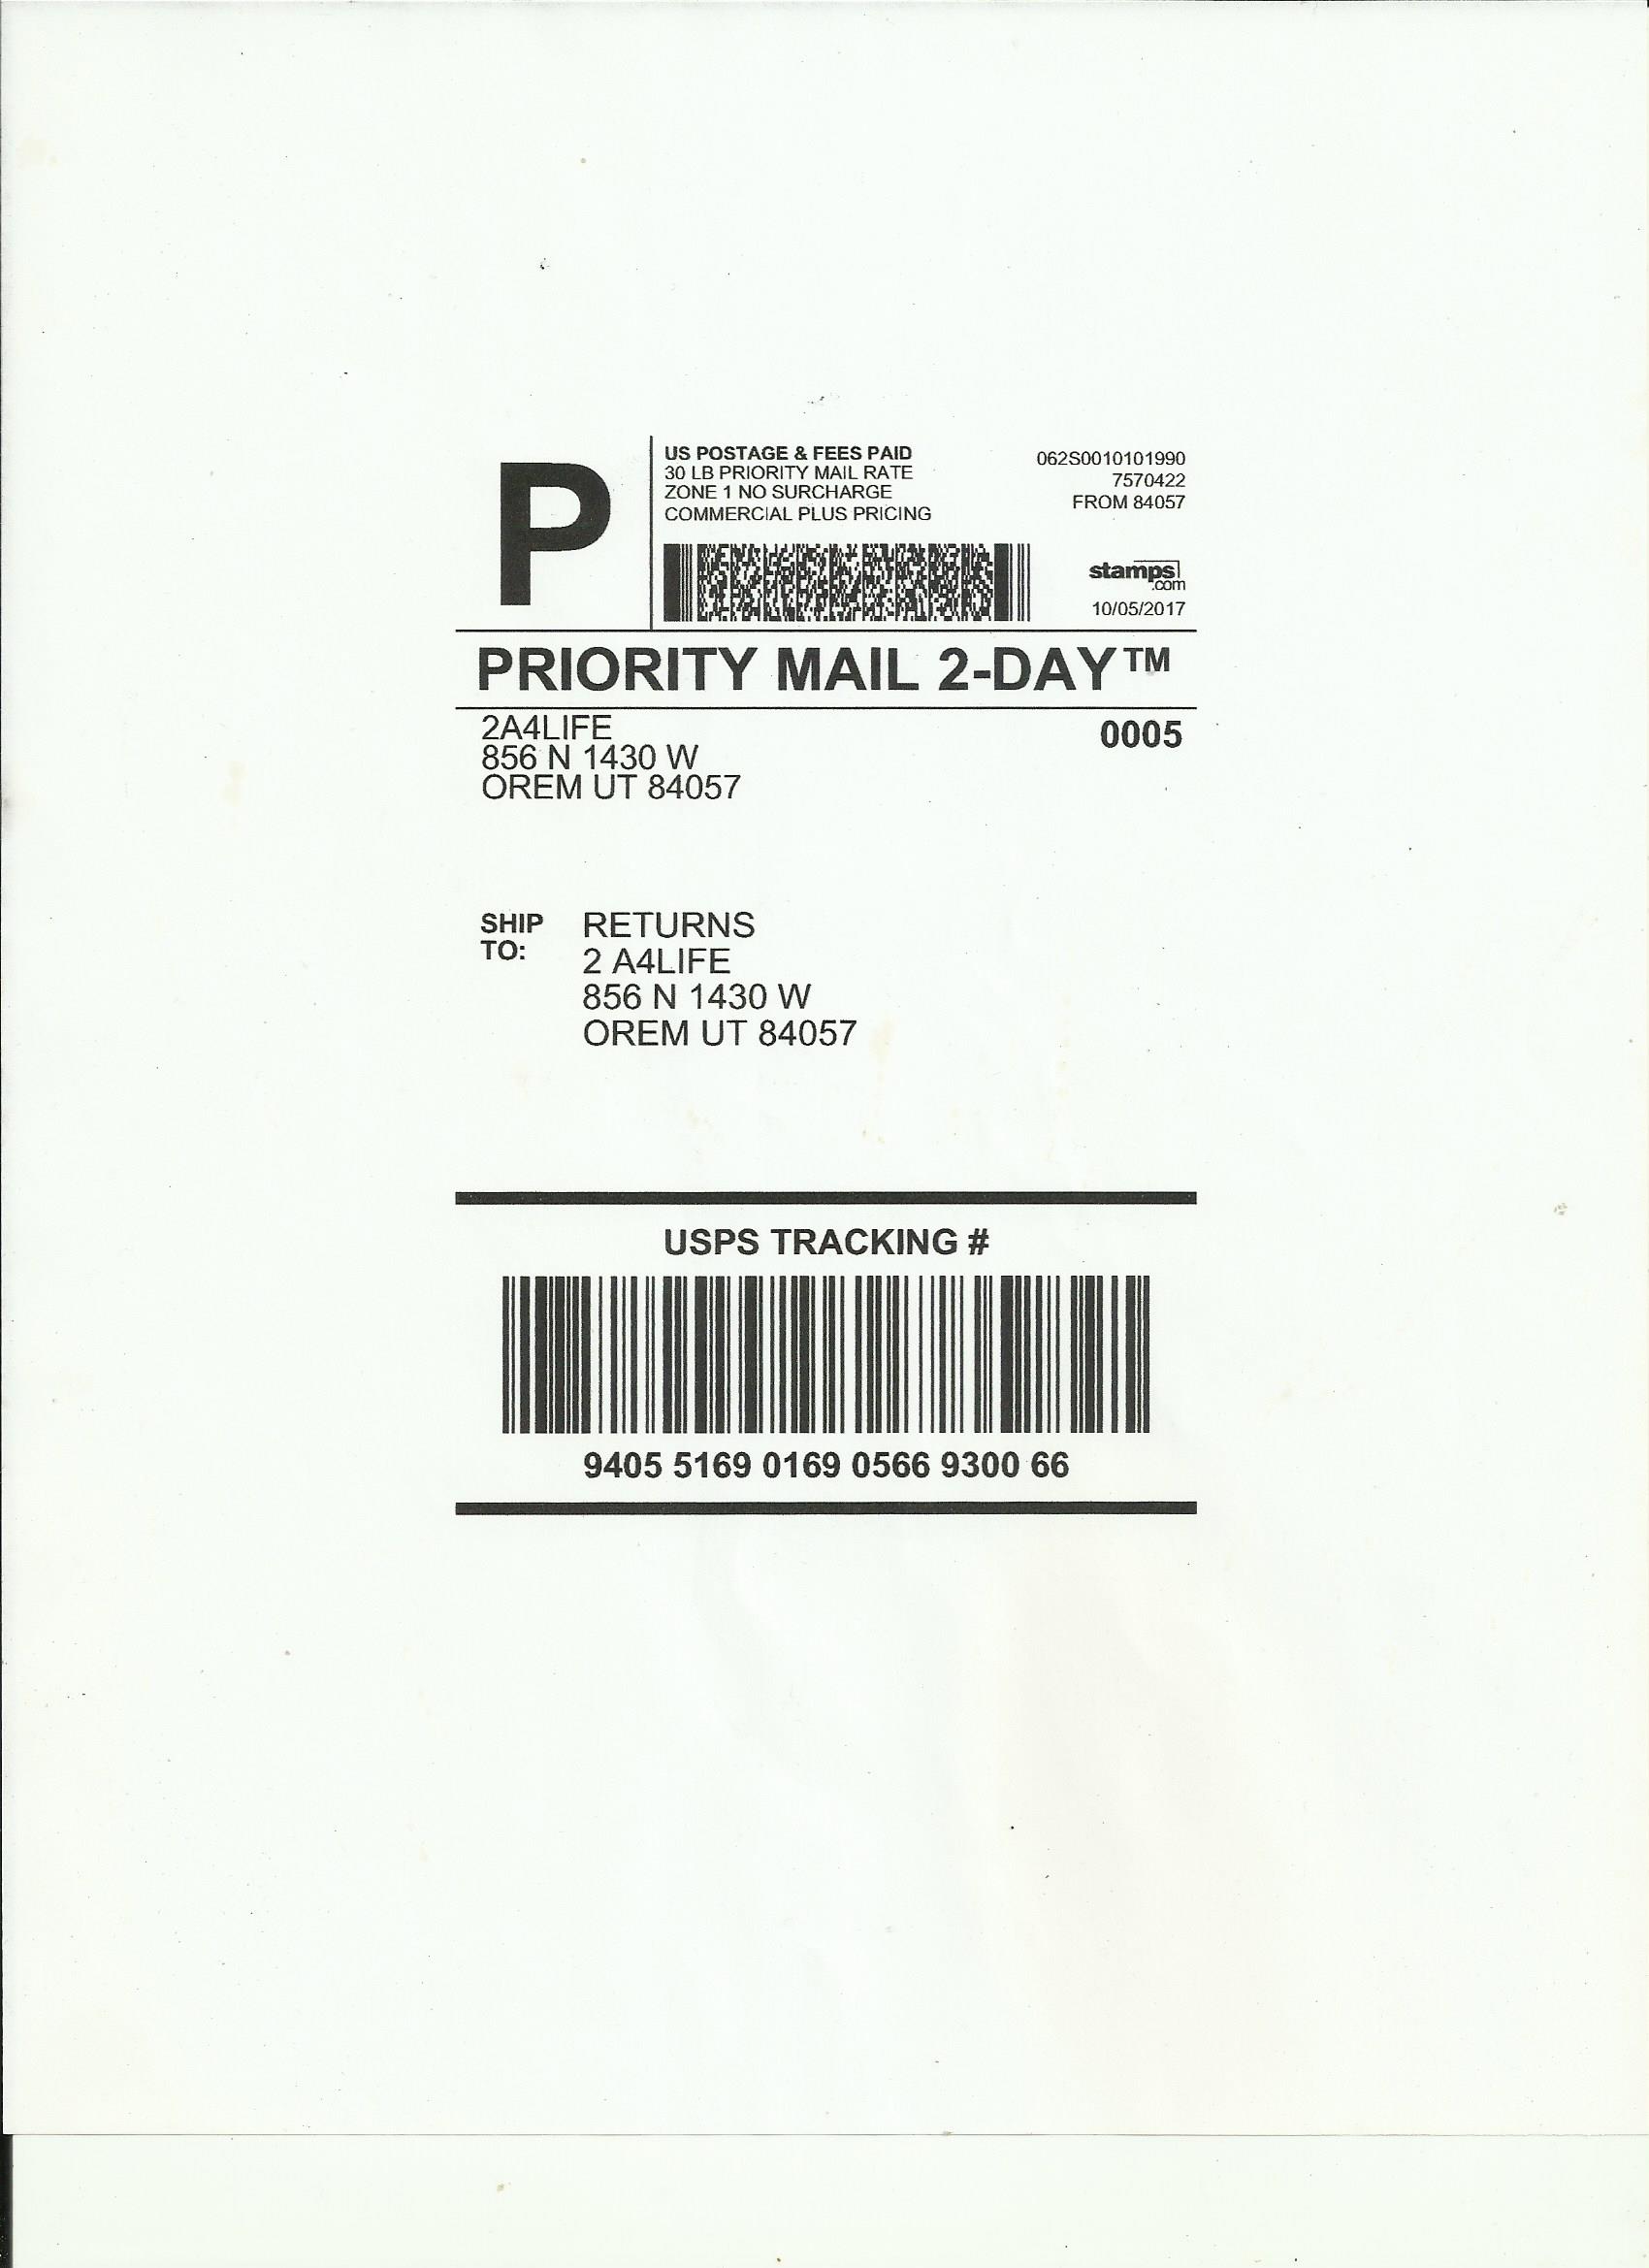 Copy of return shipping label